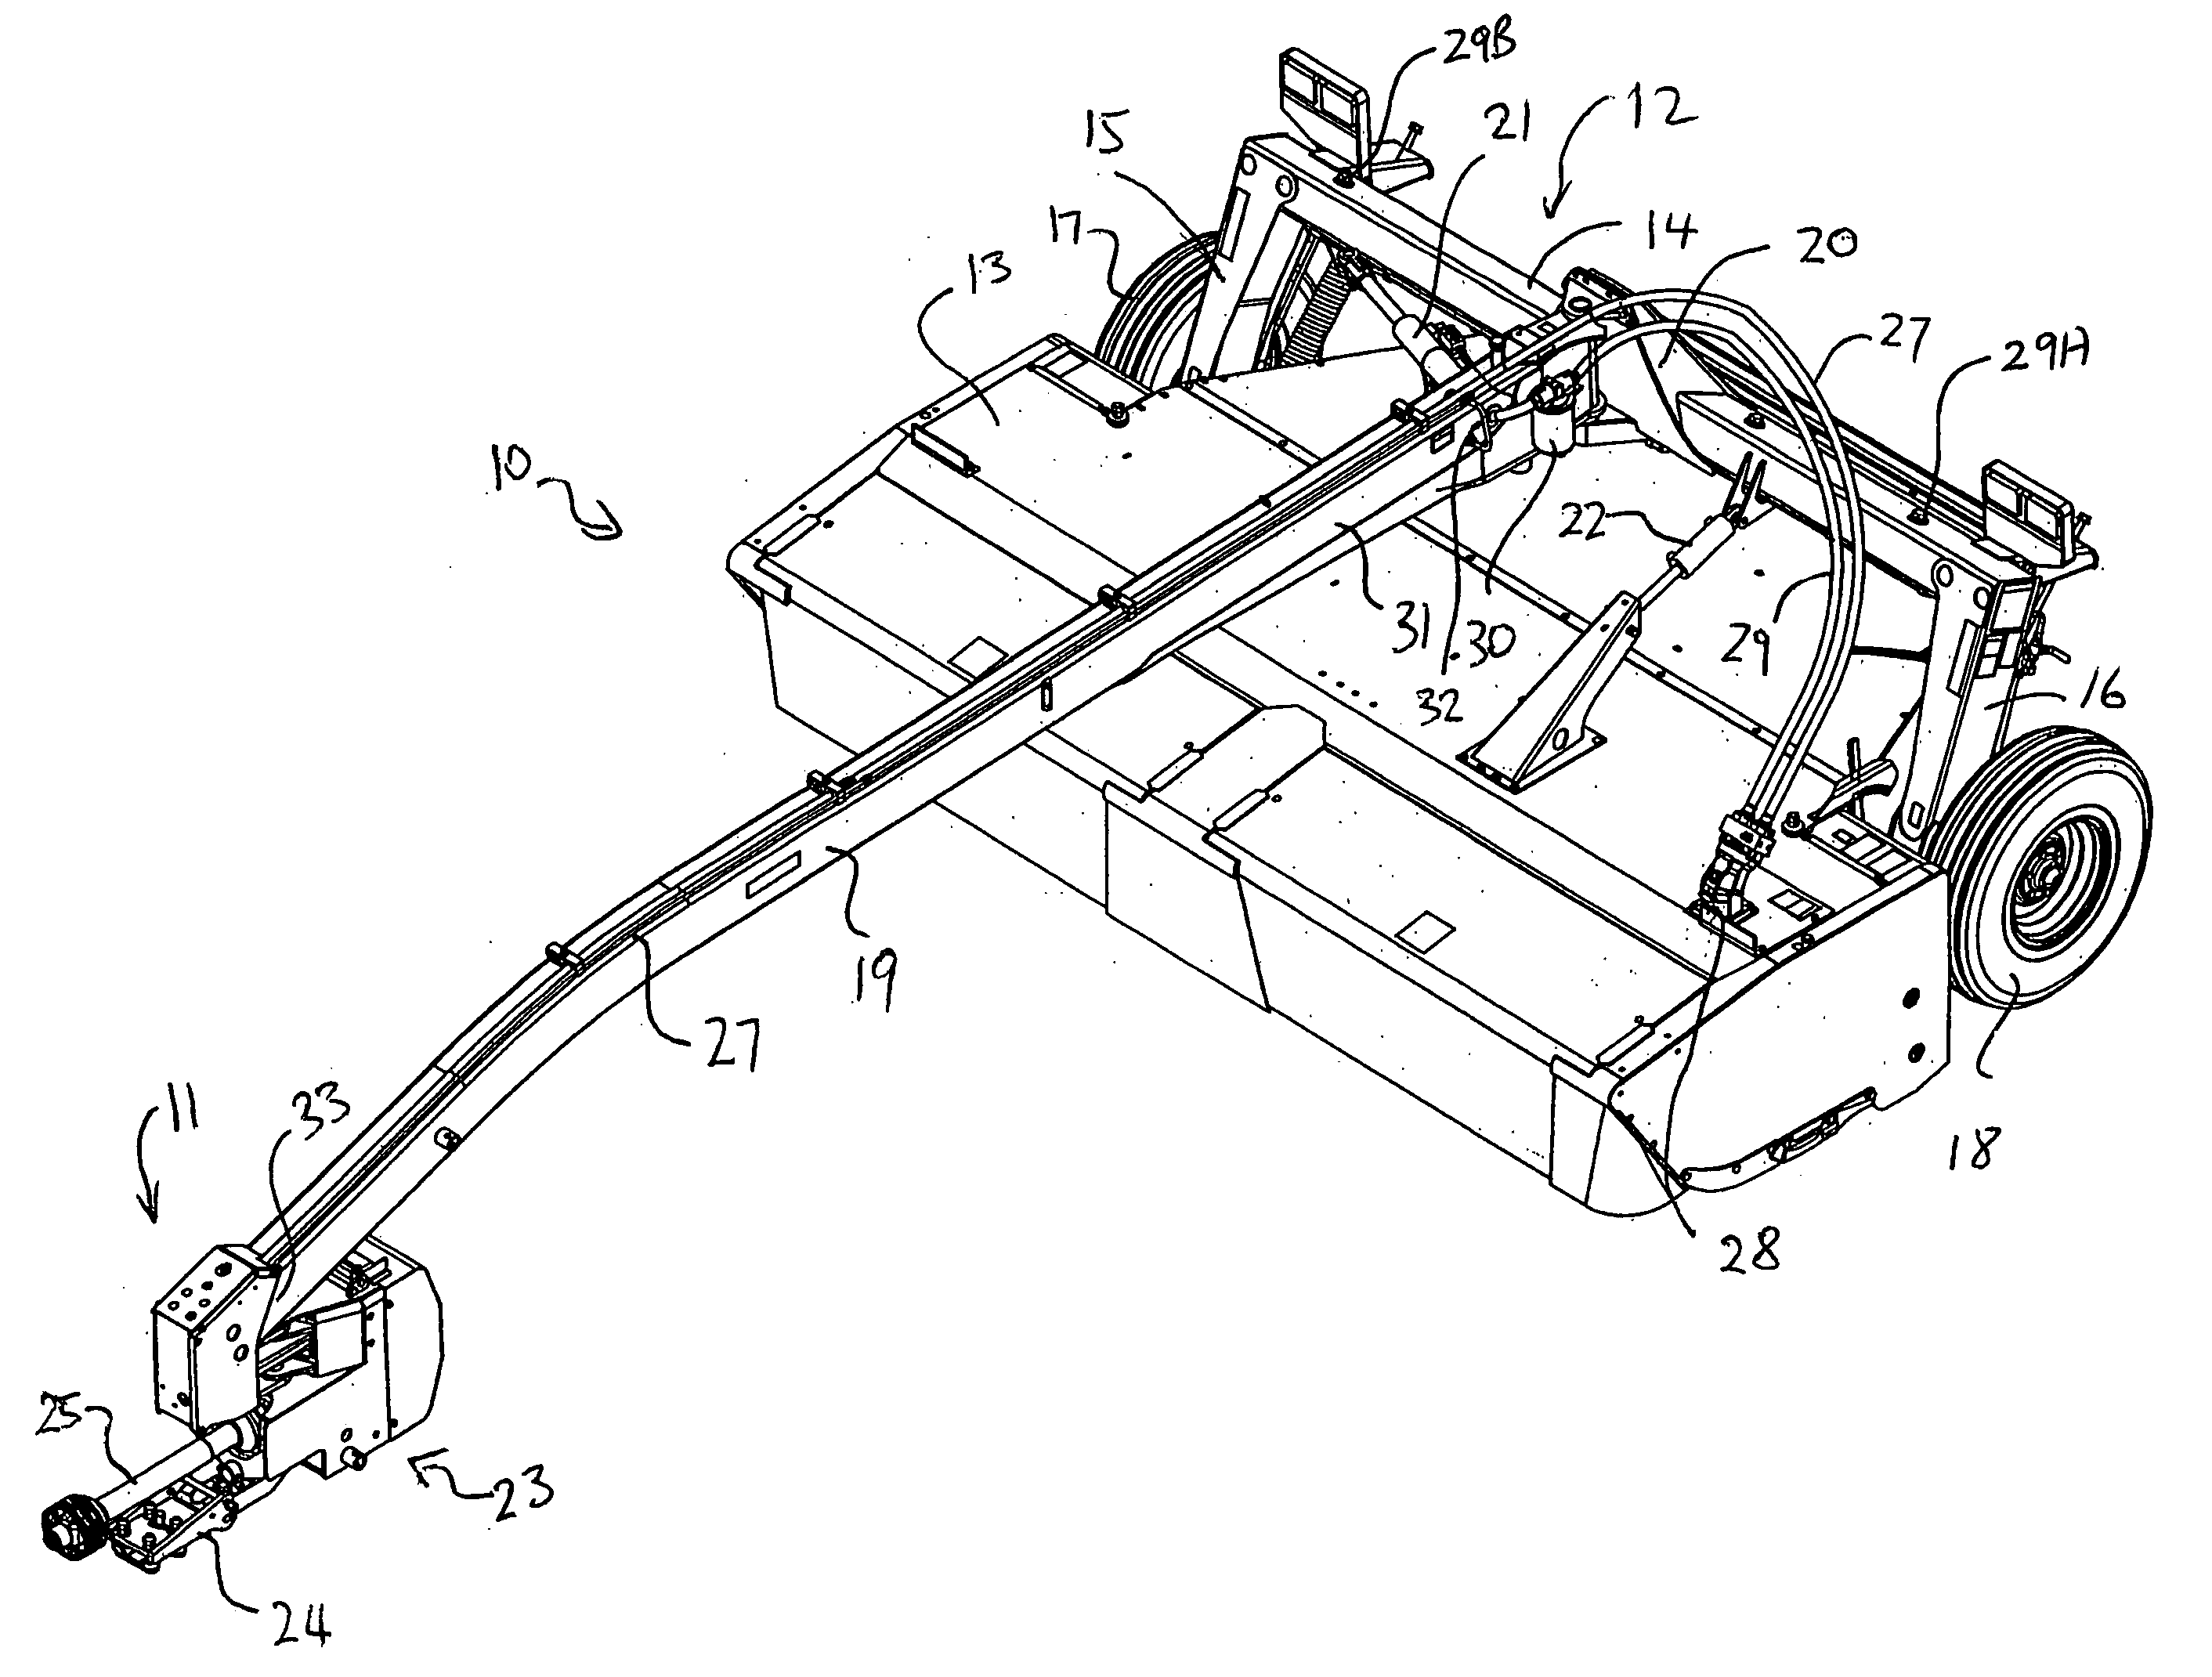 Hydraulic drive arrangement for the cutter of a pull-type crop harvesting machine